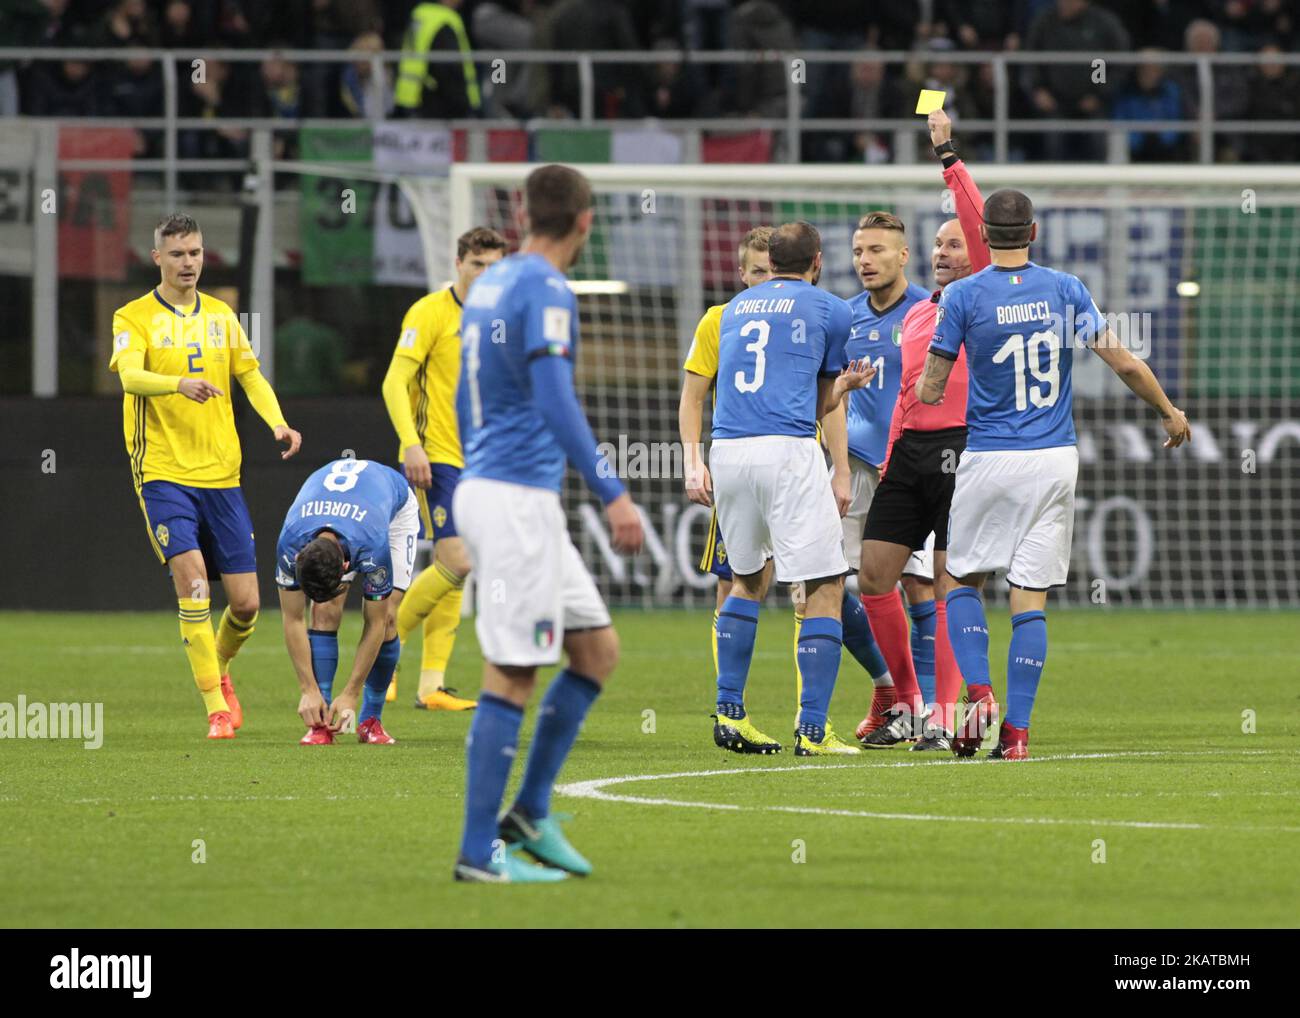 Giorgio Chiellini during the playoff match for qualifying for the Football World Cup 2018 between Italia v Svezia, in Milan, on November 13, 2017. Stock Photo